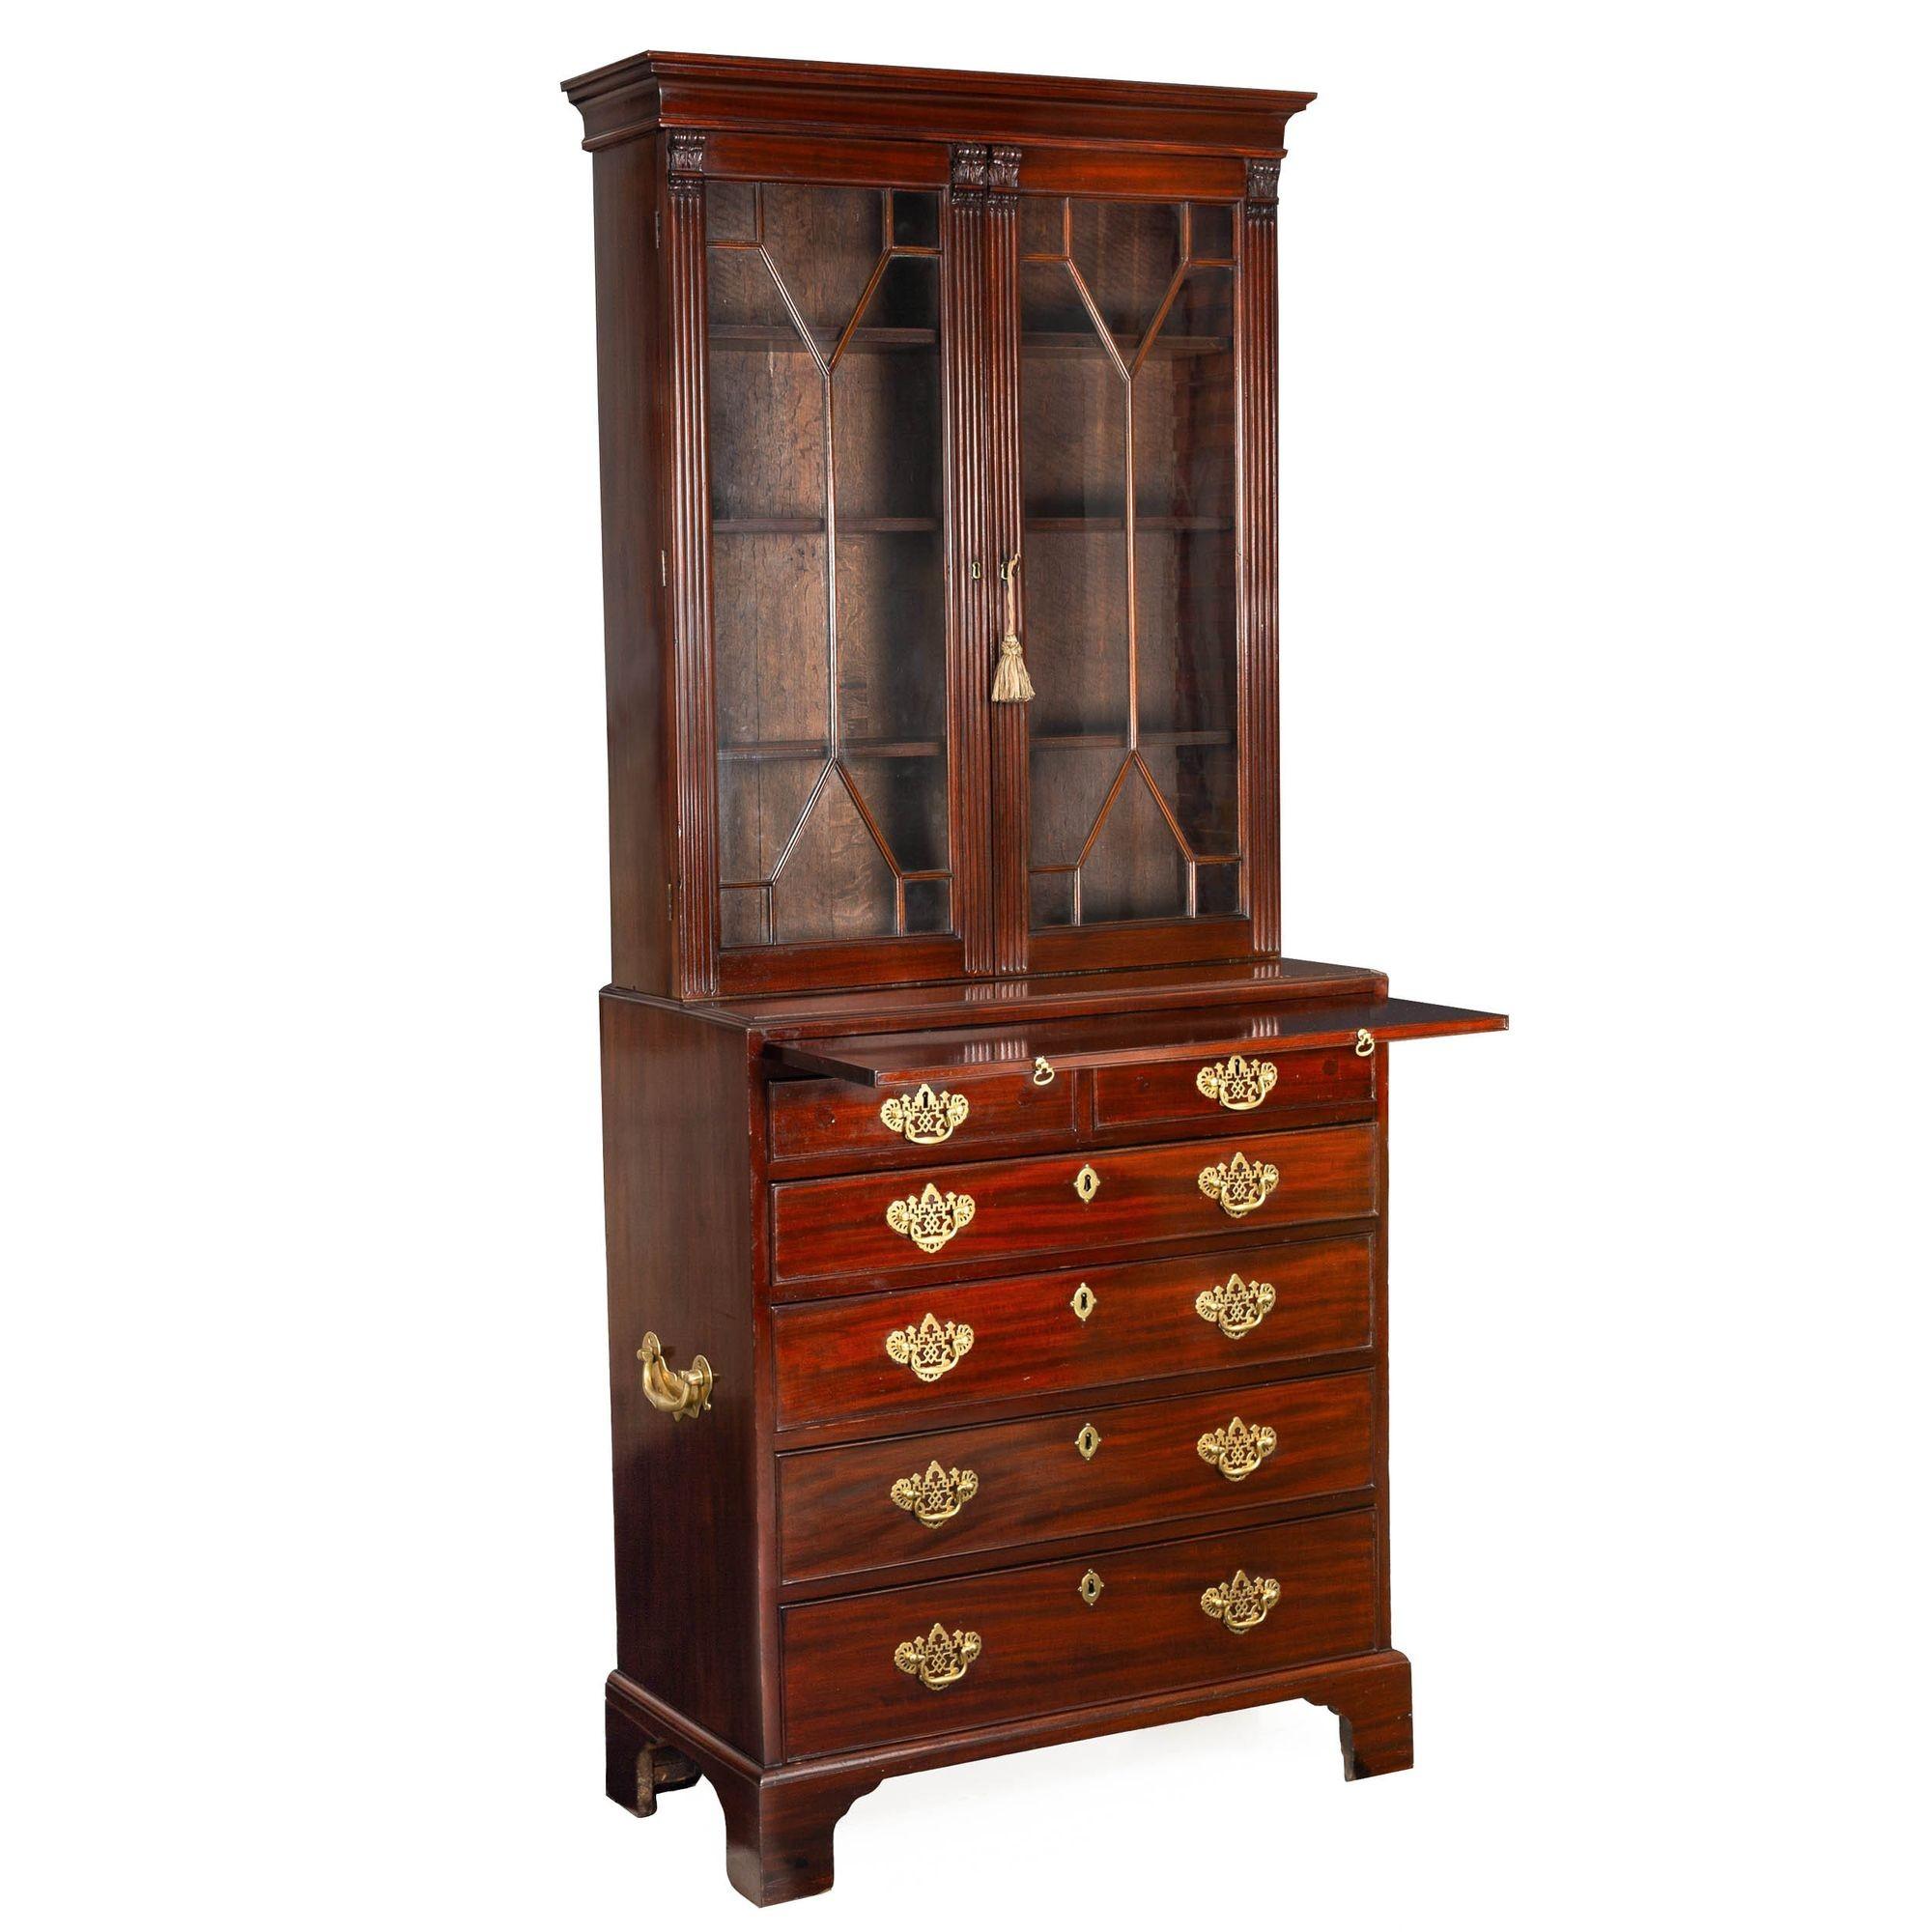 GEORGE III MAHOGANY DIMINUTIVE SECRETARY WITH BOOKCASE
England, circa 1780
Item # 307PZN13W 

A very fine secretary desk of diminutive proportions, this fabulous form features an upper bookcase with a cove-molded cornice over a pair of glazed doors